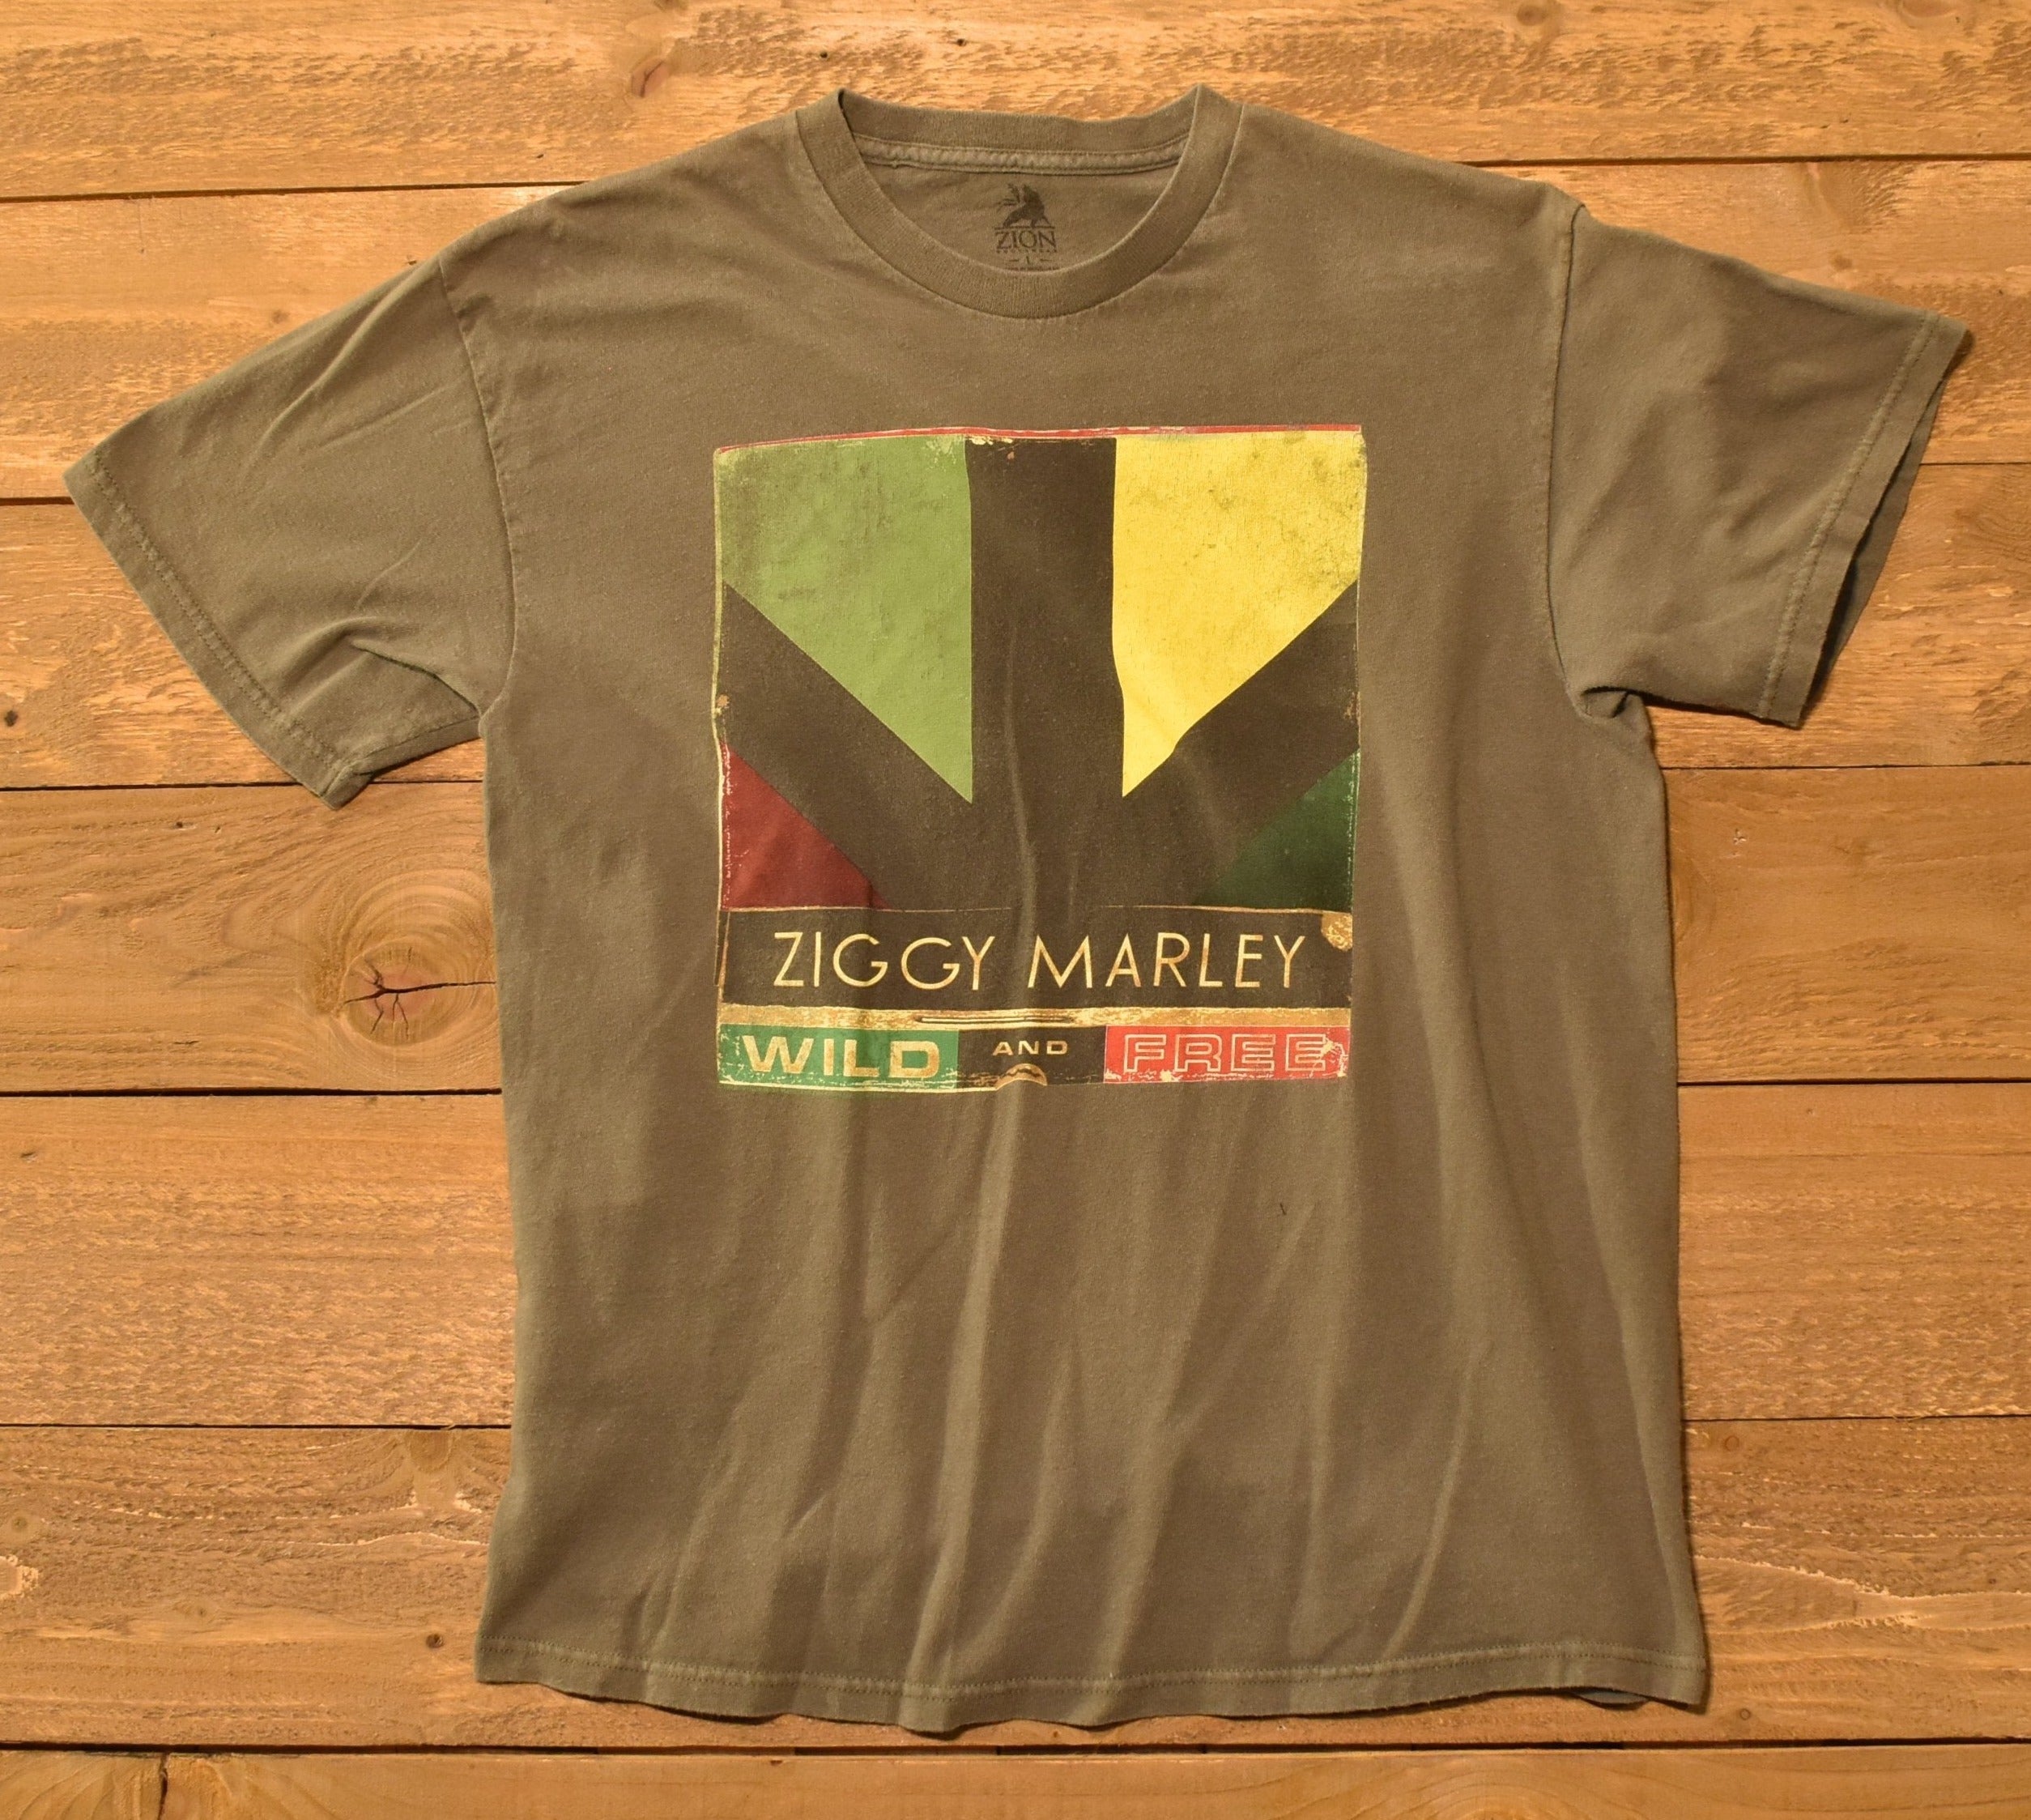 Ziggy Marley Wild and Free Mens Large T shirt Zion Used Green Tee